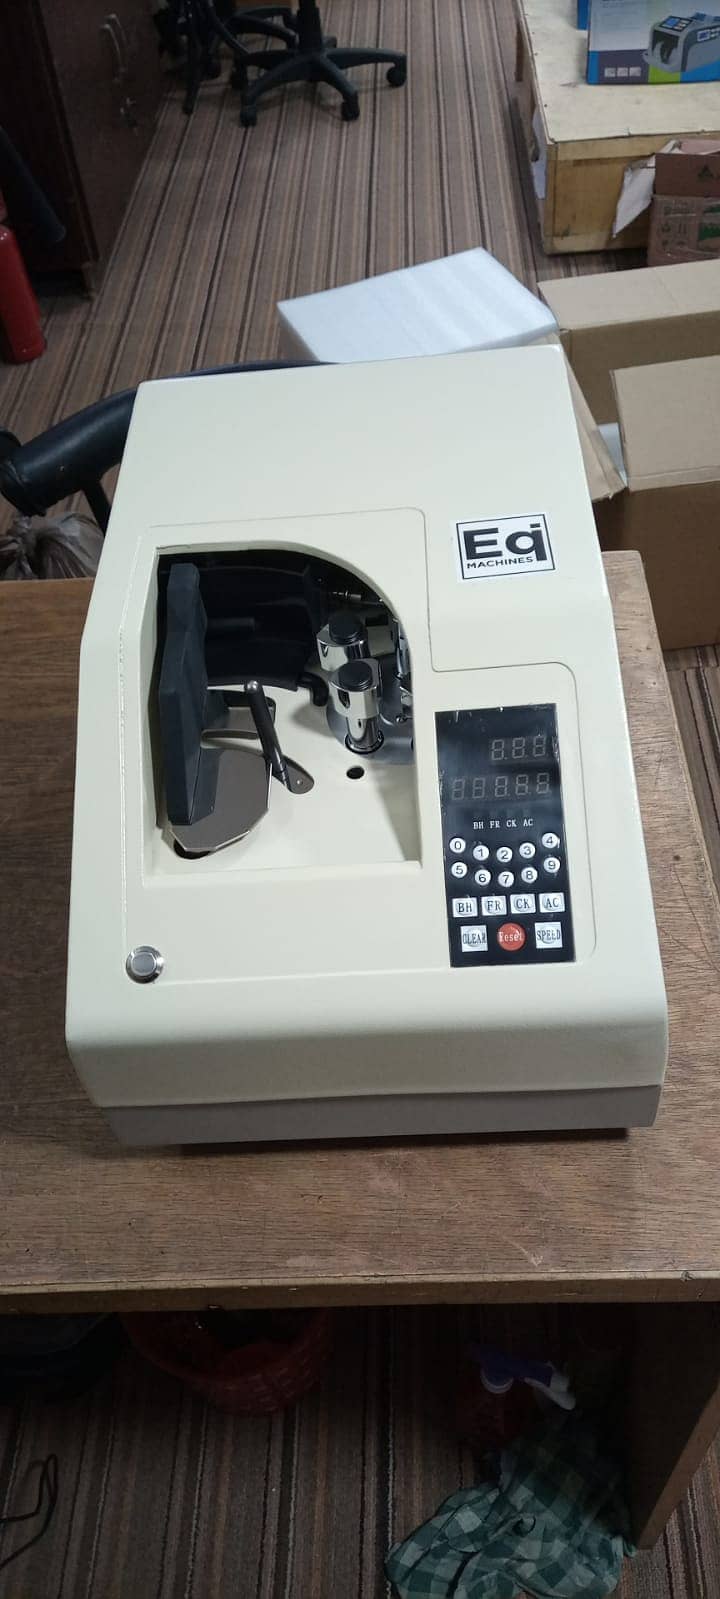 Cash note counting machine in Pakistan with fake note detection 11